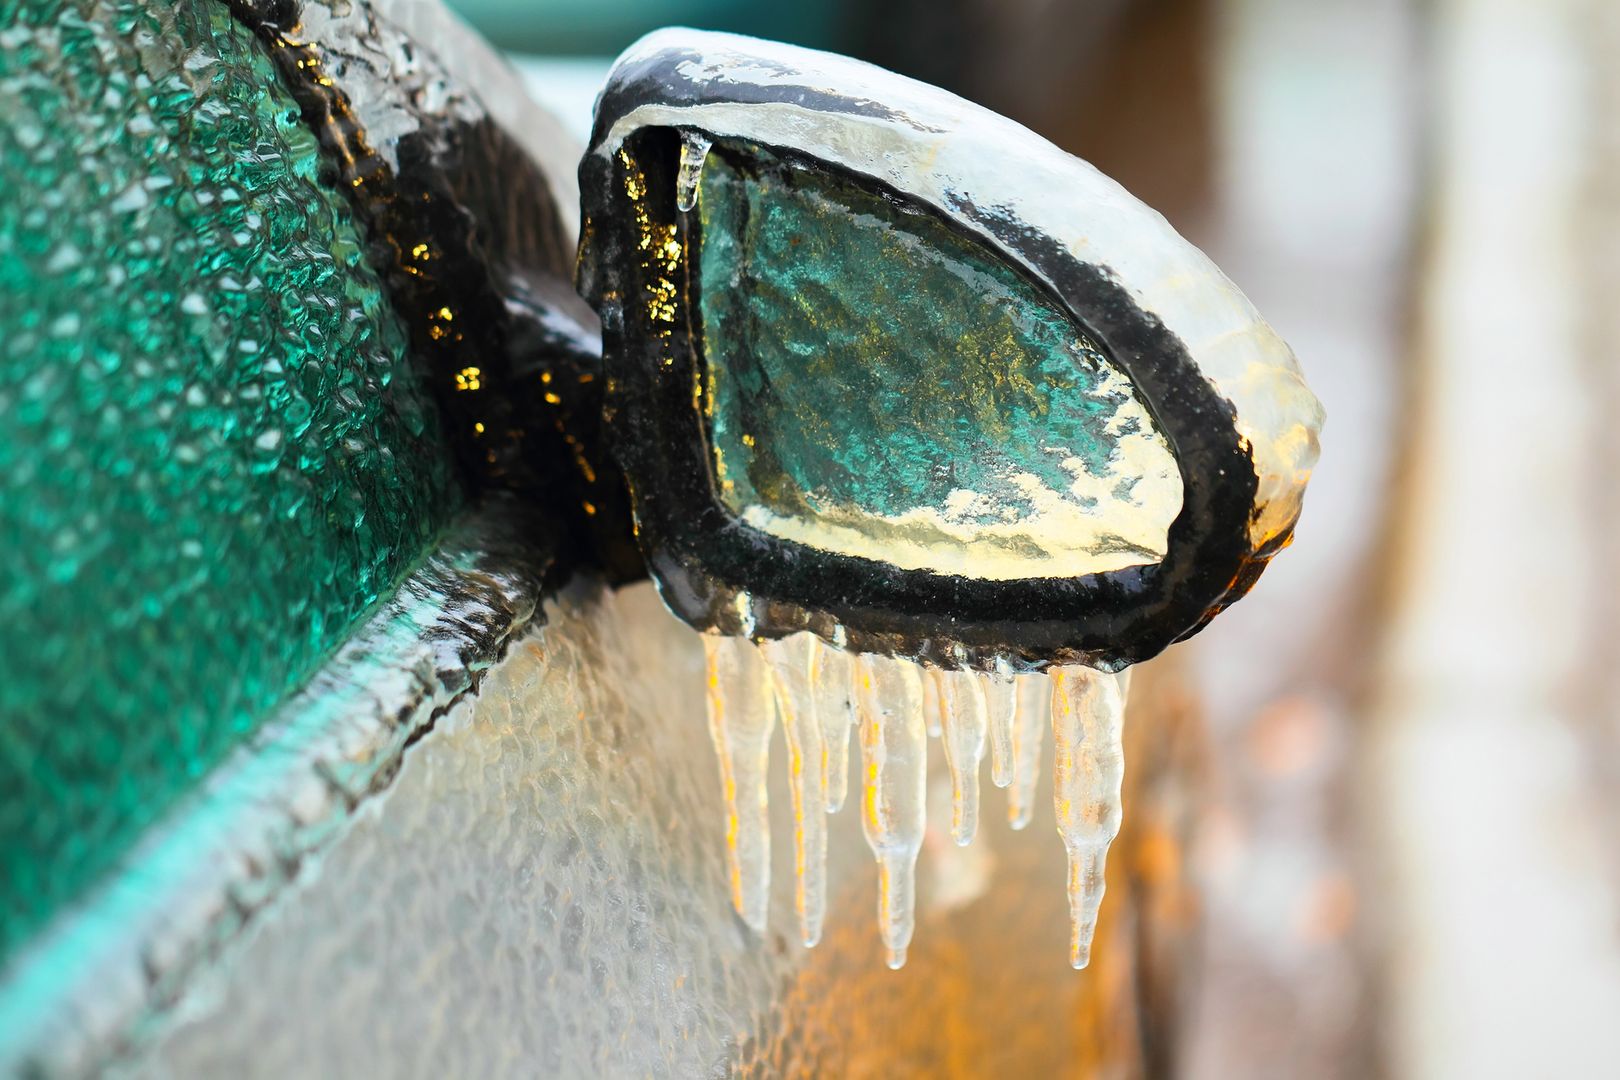 Car side mirror covered with ice and icicles, close up